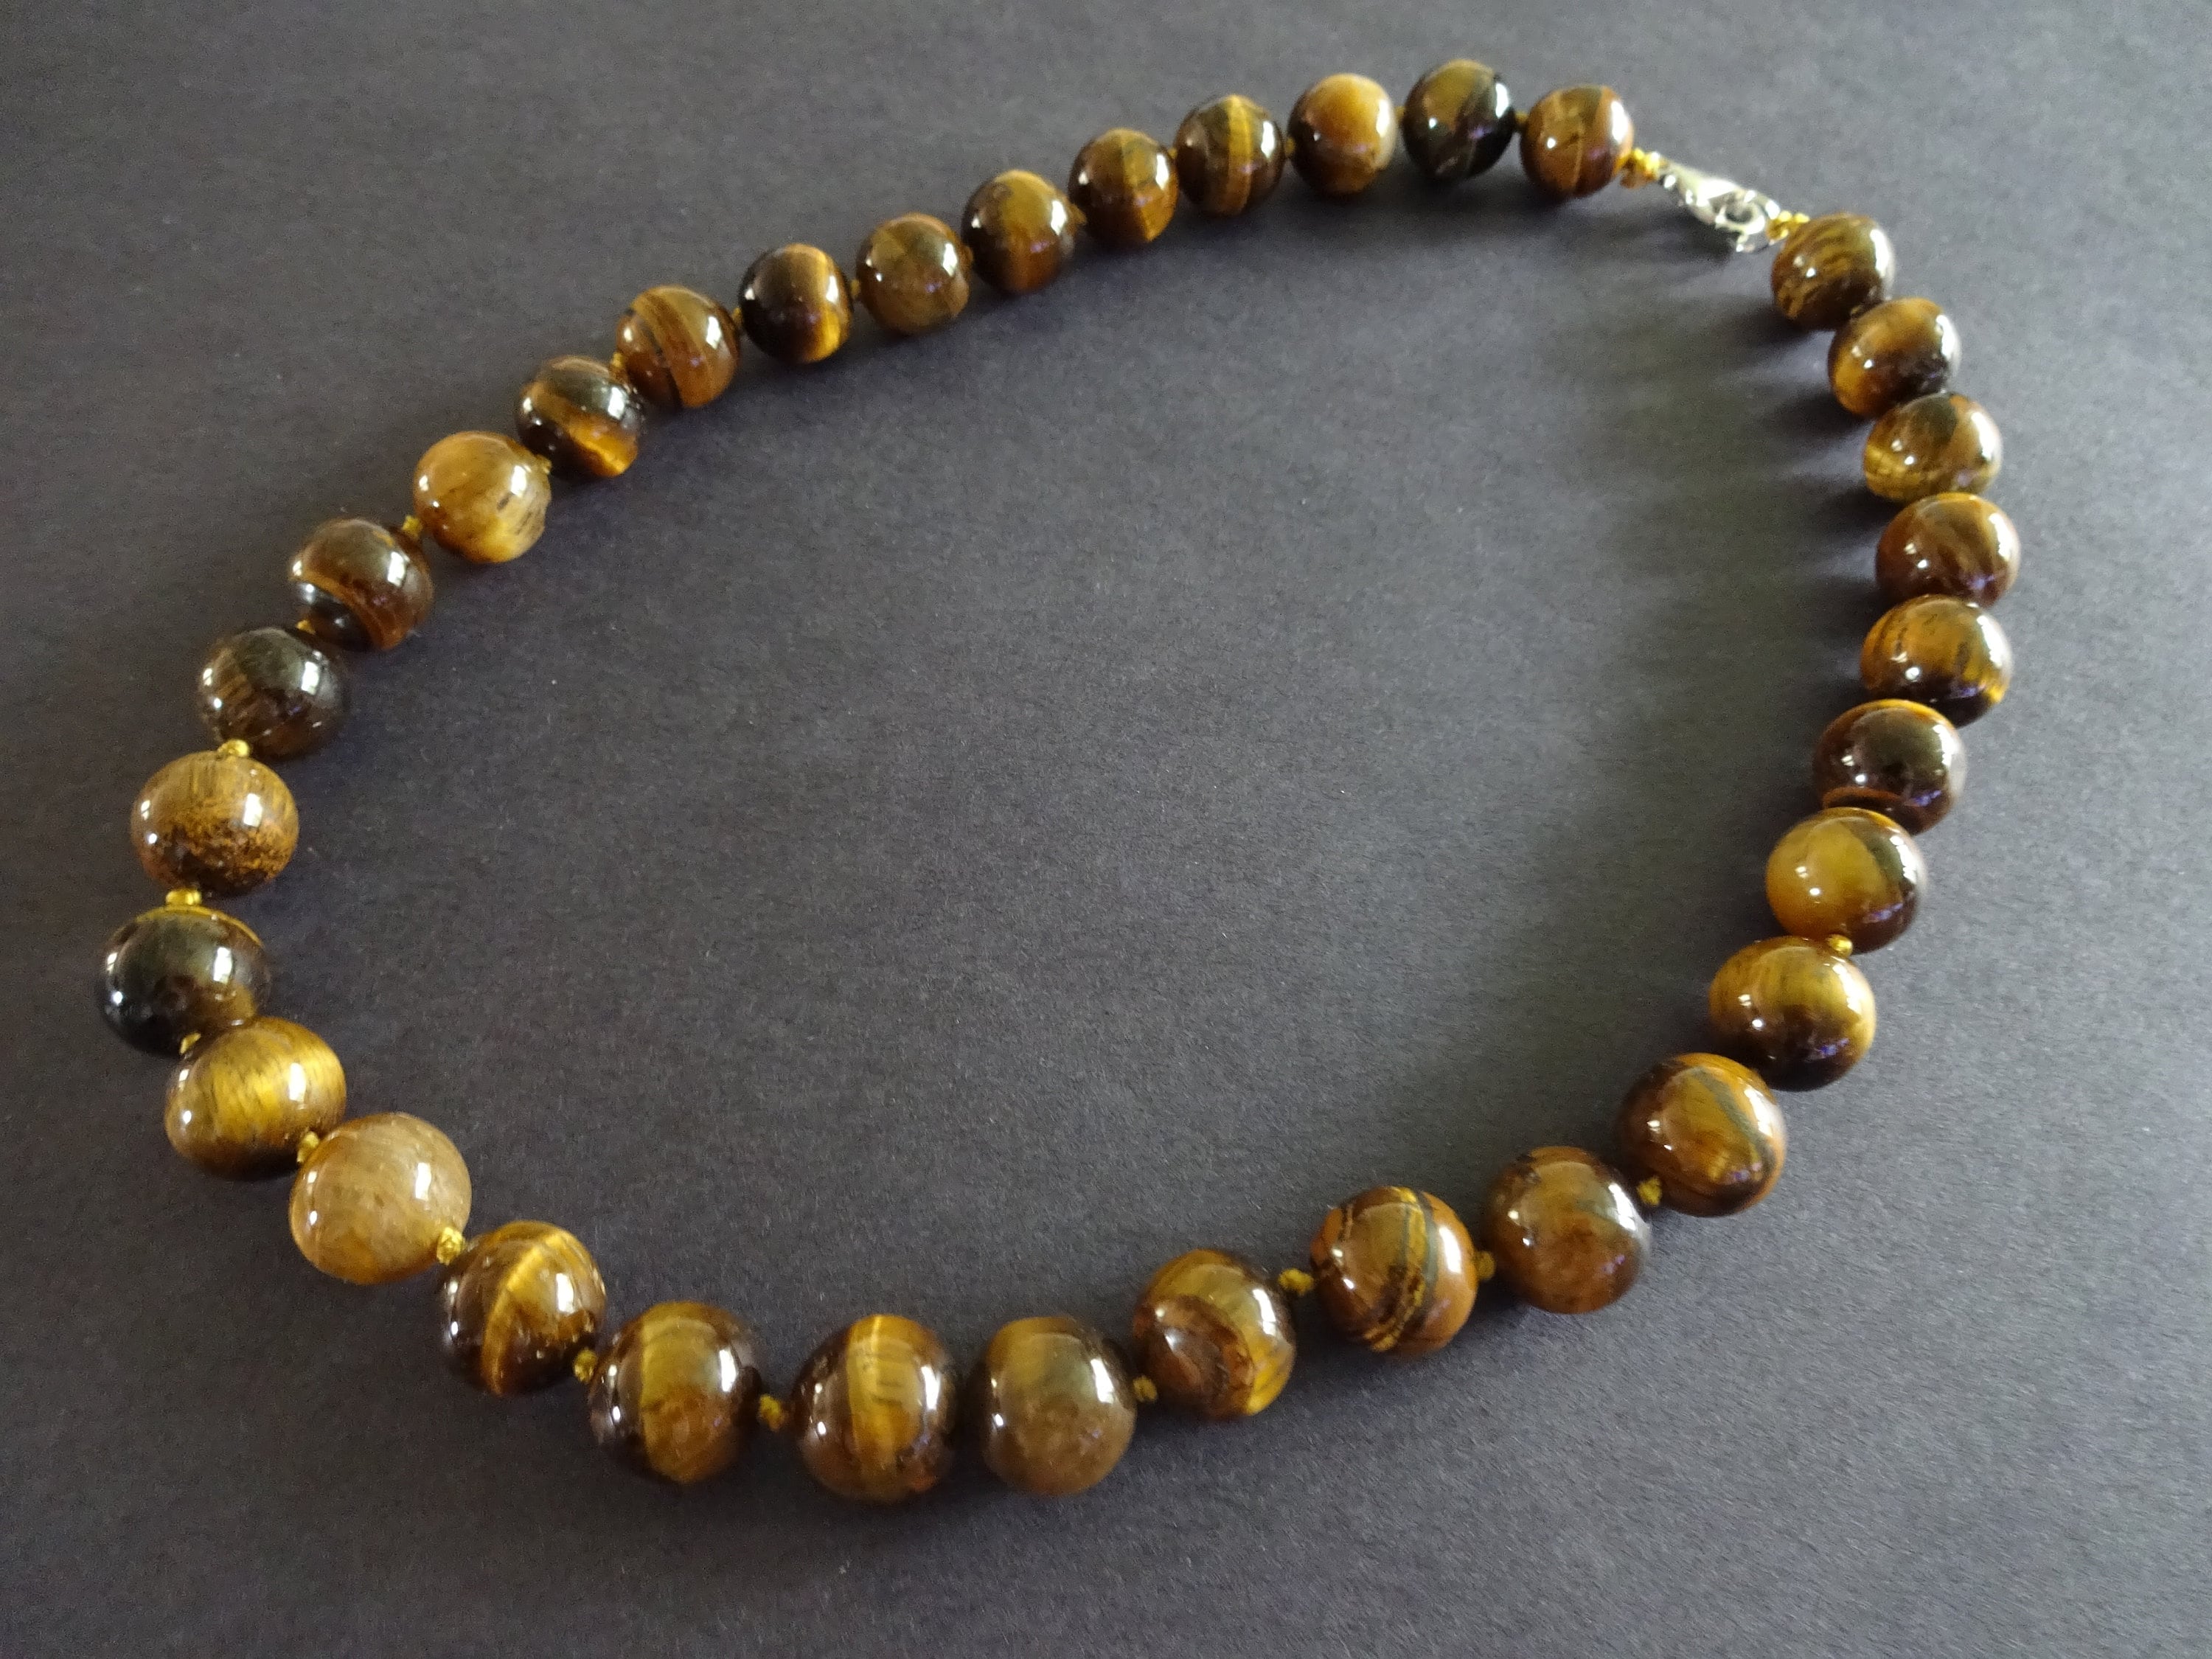 Natural Tiger Eye Bead Necklace, 18 Inch Long, Large Ball Beads, Green ...